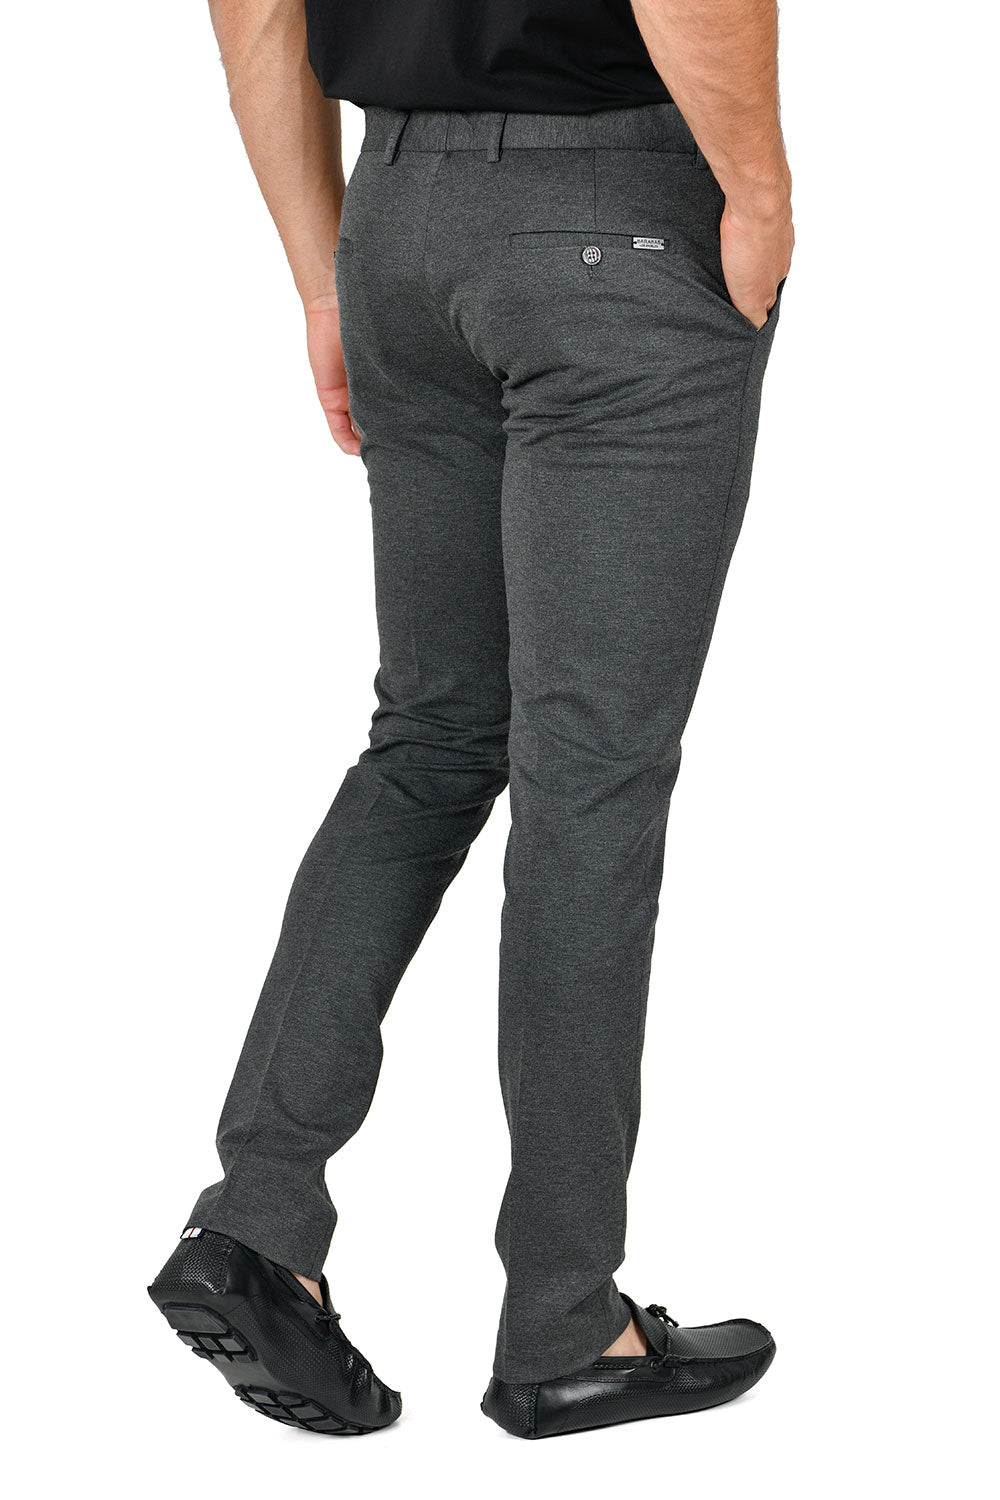 Barabas Men's Solid Color Basic Essential Chino Dress Pants CP4007 Charcoal